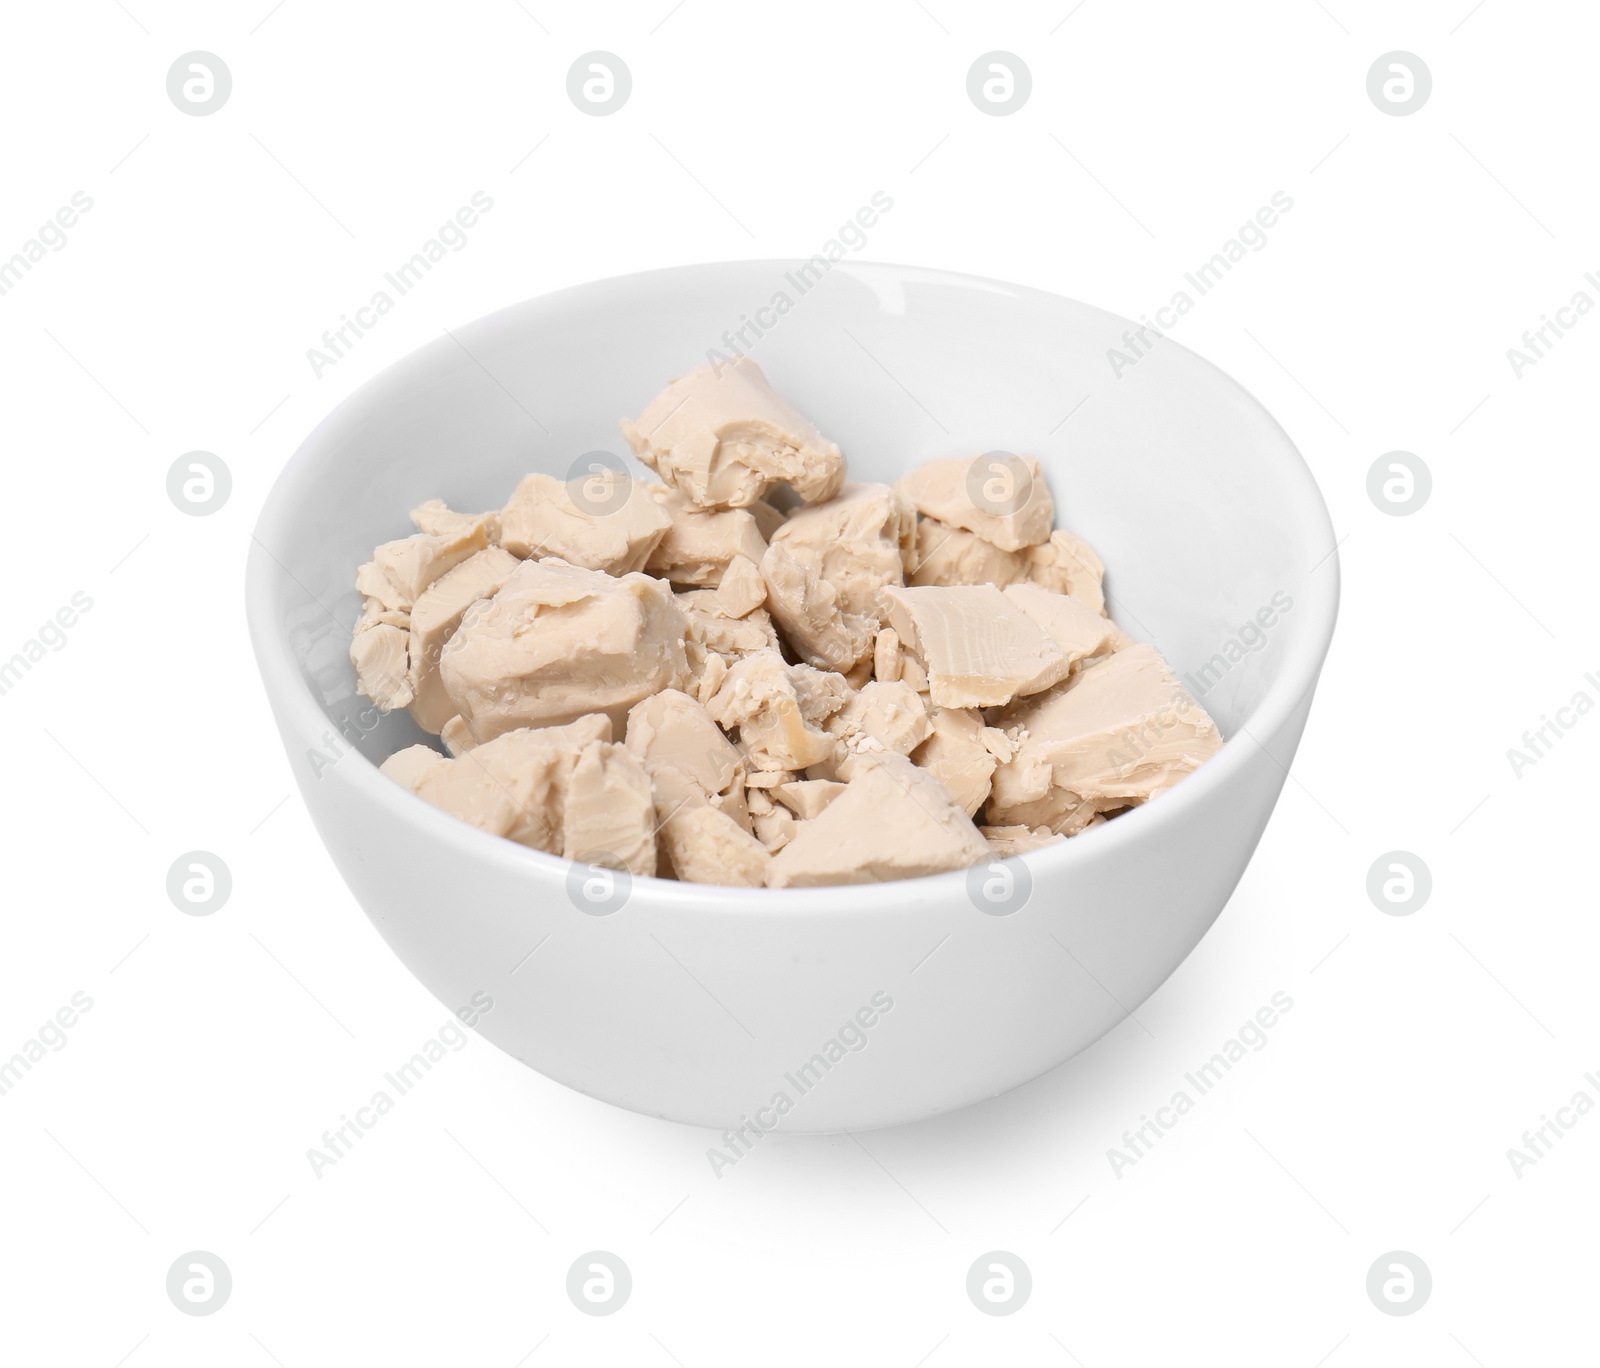 Photo of Pieces of compressed yeast in bowl isolated on white